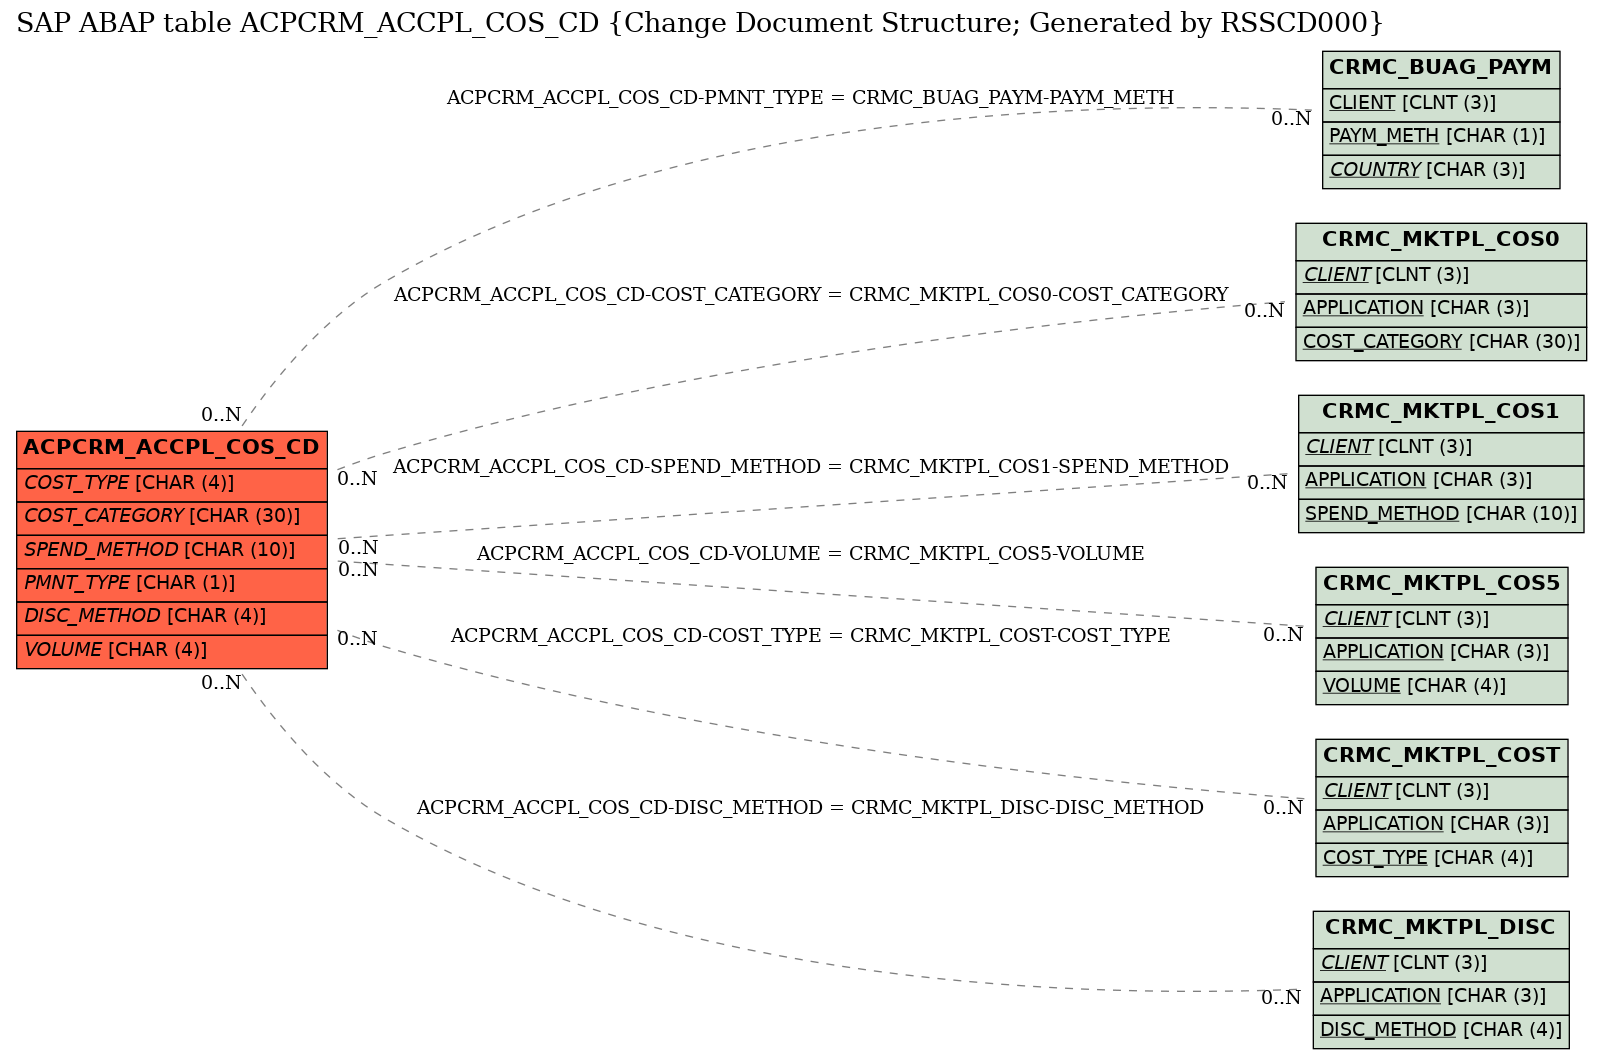 E-R Diagram for table ACPCRM_ACCPL_COS_CD (Change Document Structure; Generated by RSSCD000)